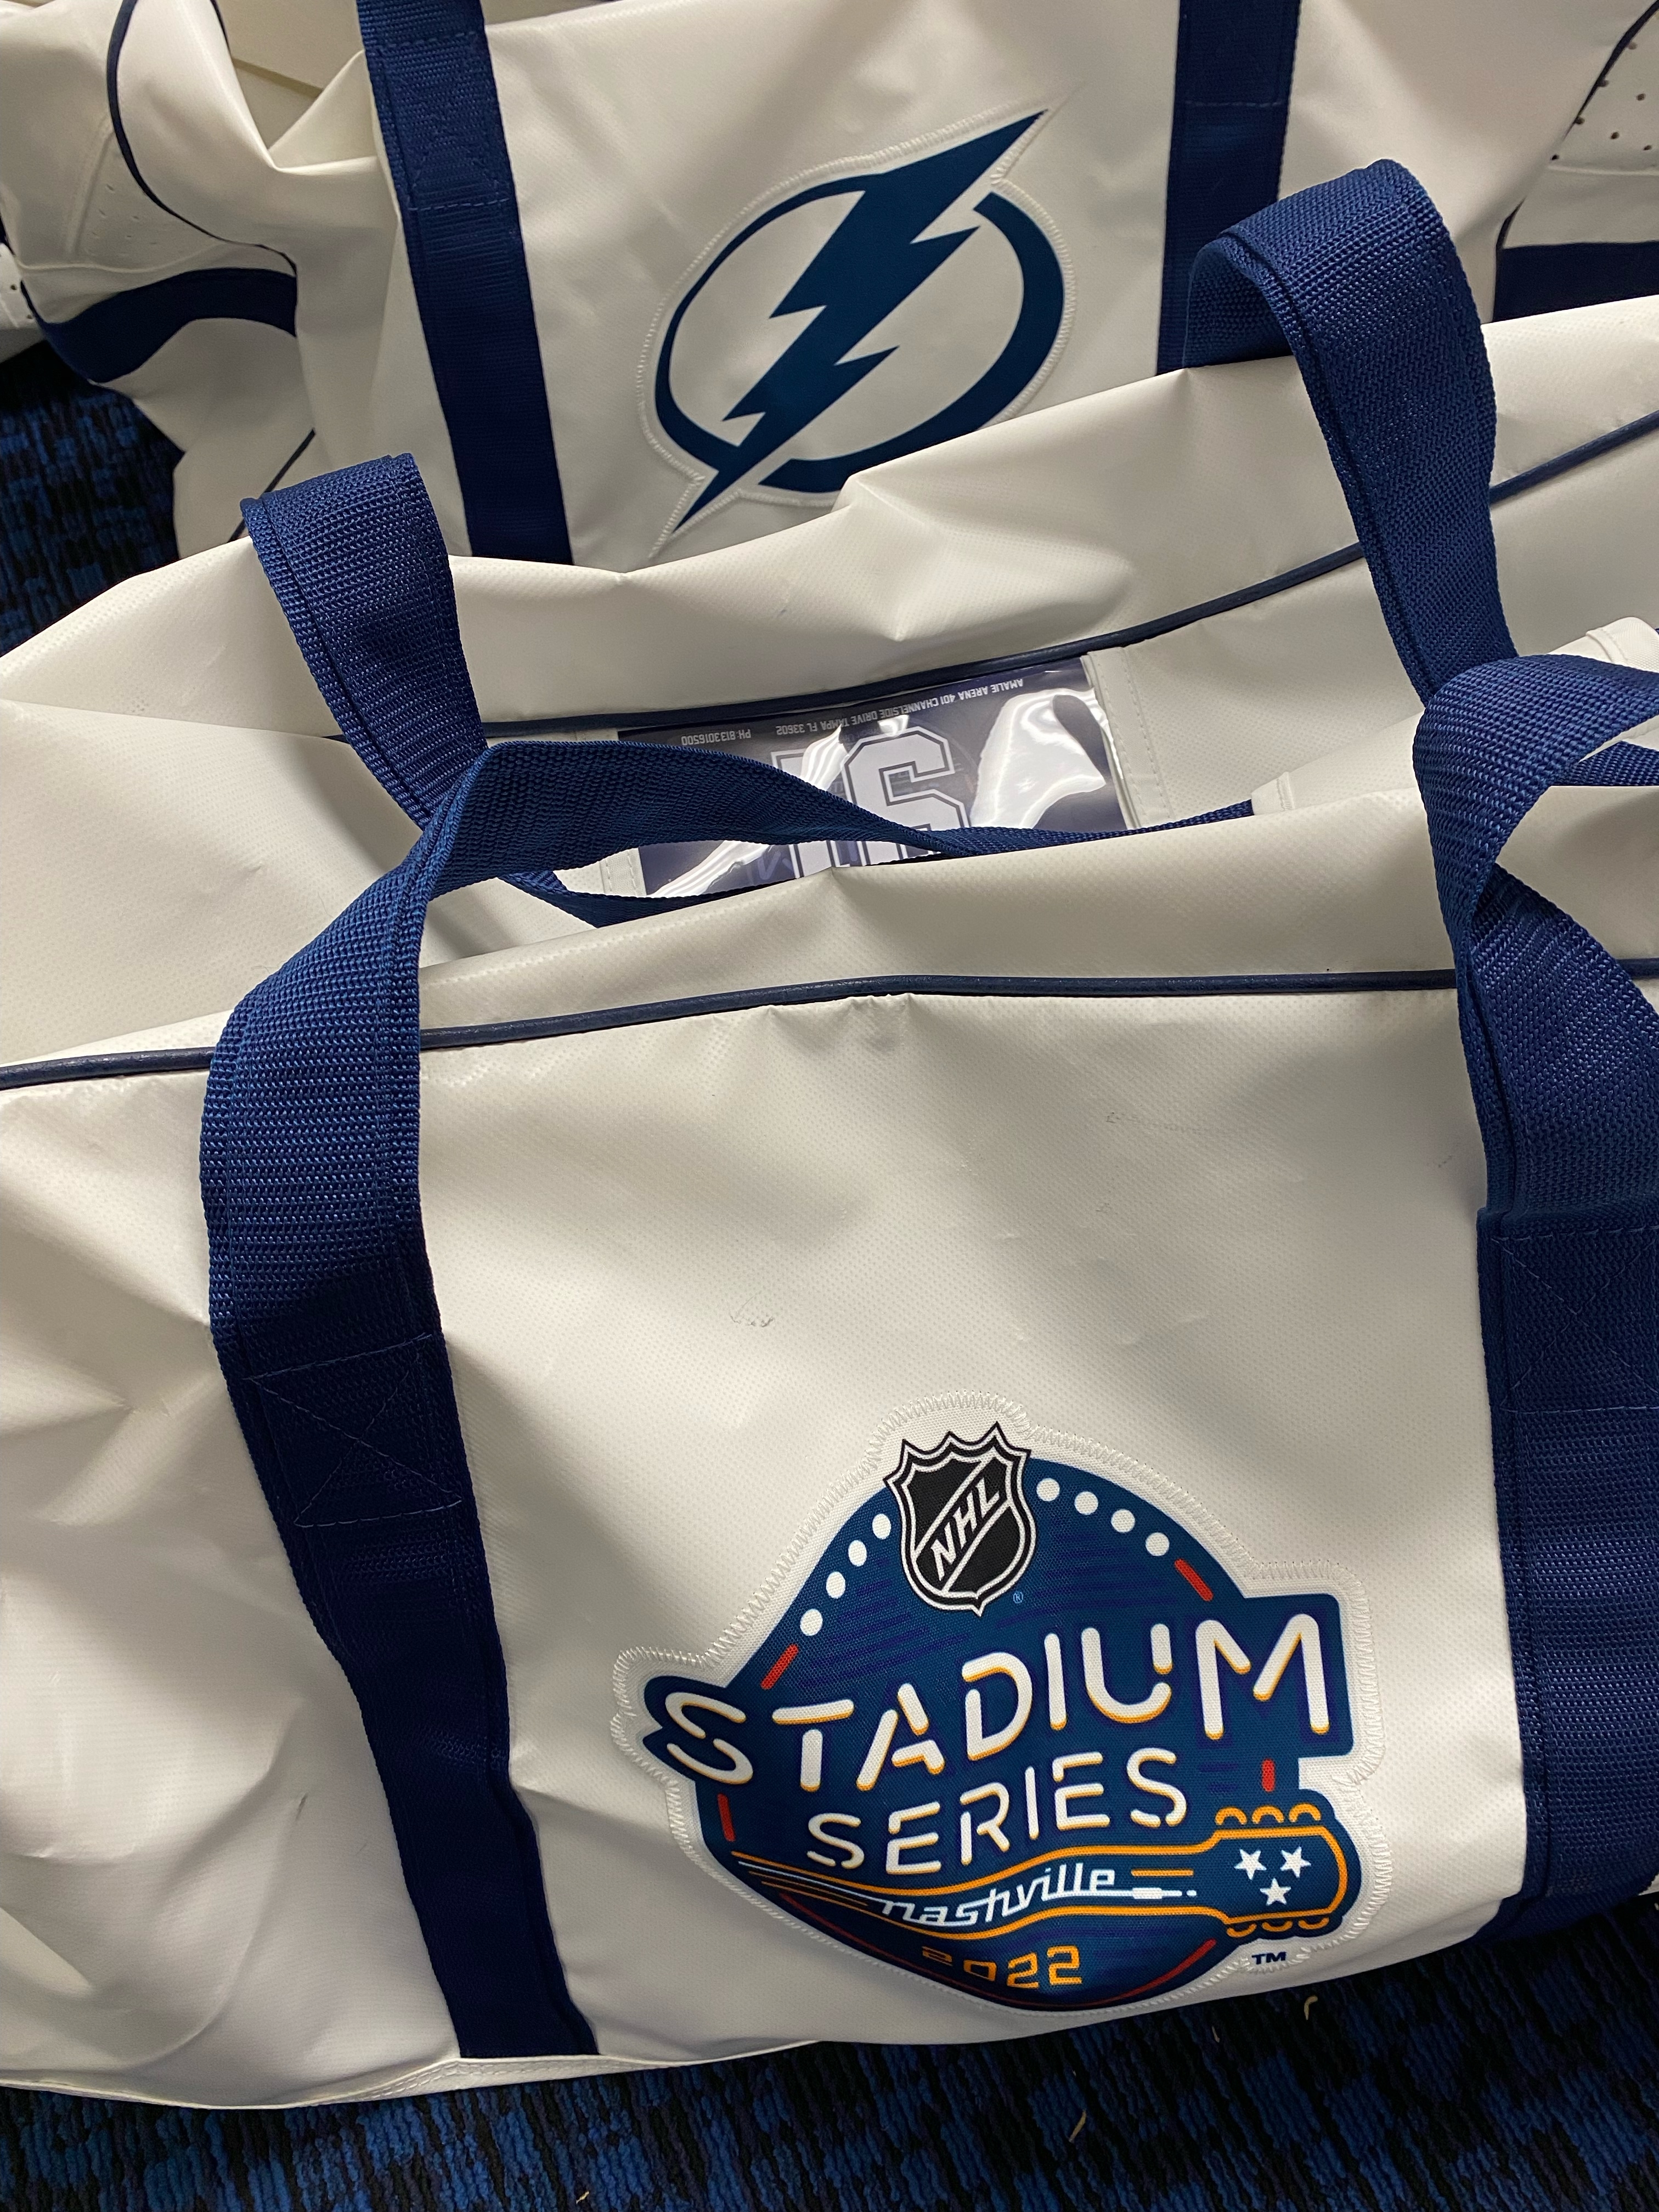 Tampa Bay Lightning sports new jersey design for Gasparilla game day